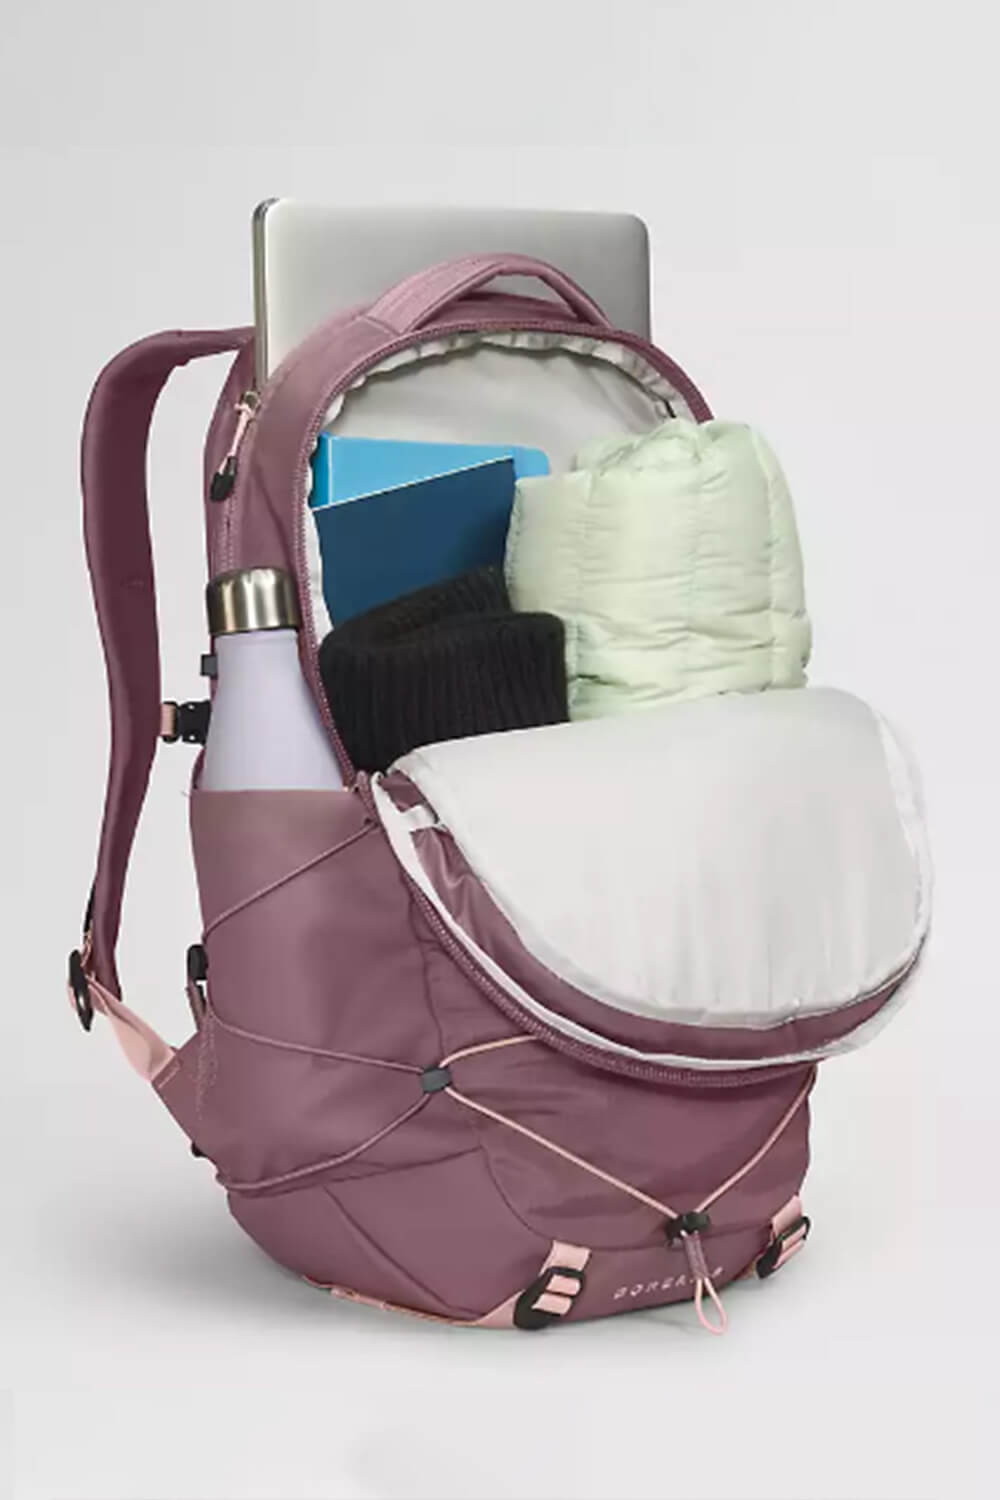 The North Face Borealis Laptop Backpack for Women in Fawn Grey/Pink ...